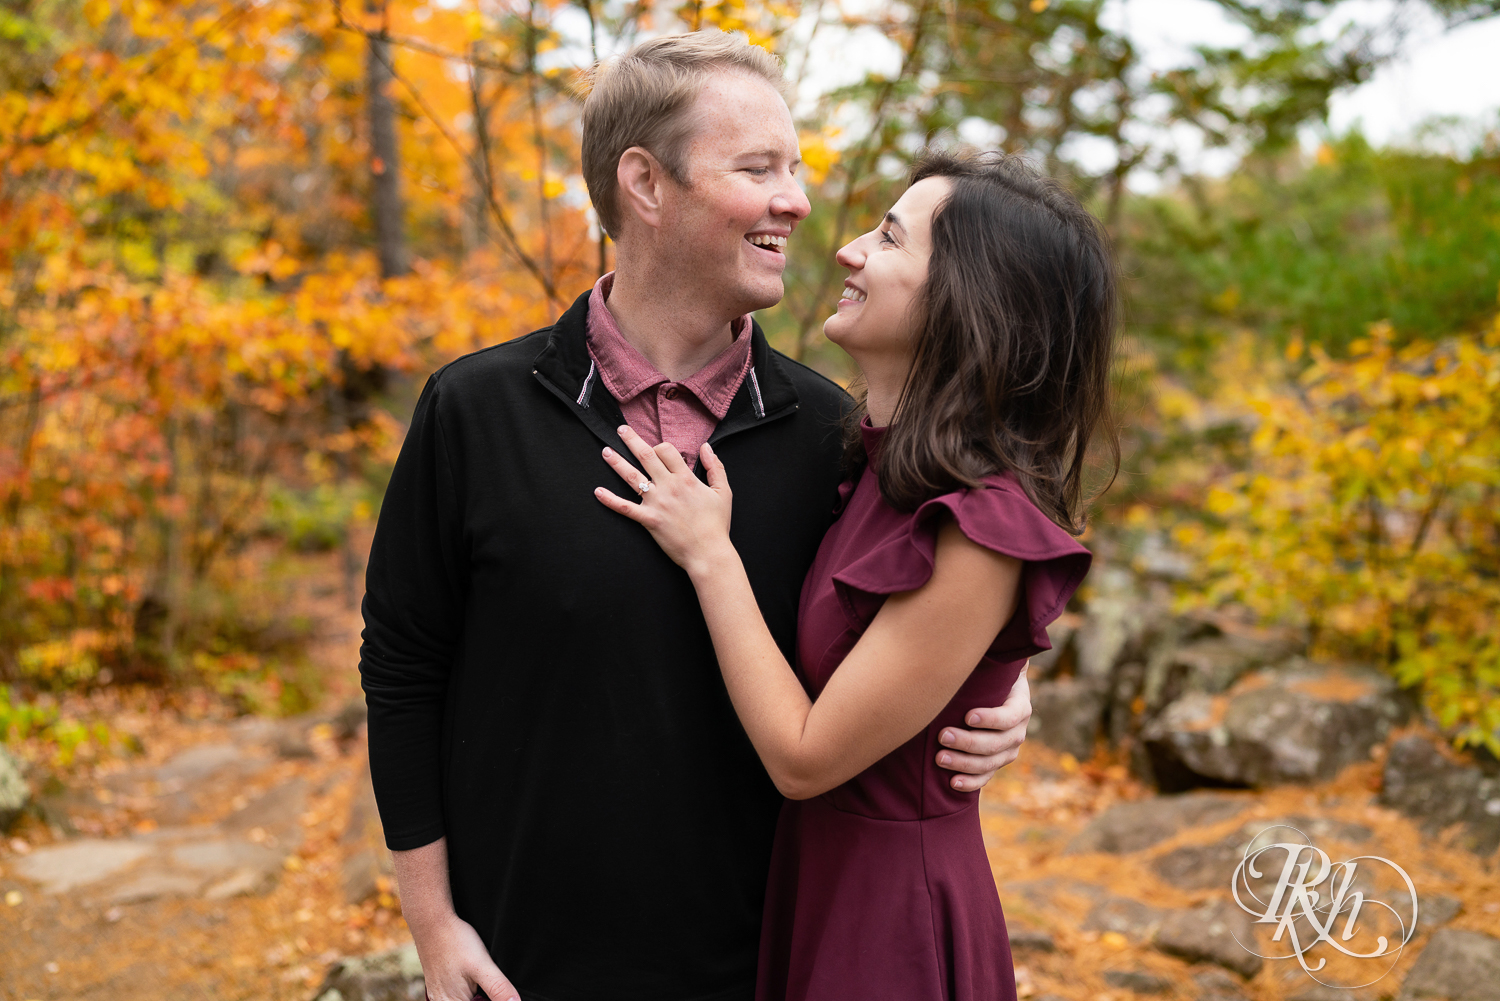 Annalyse and Brent looking at each other laughing at their sunrise engagement session in Taylors Falls, Minnesota.